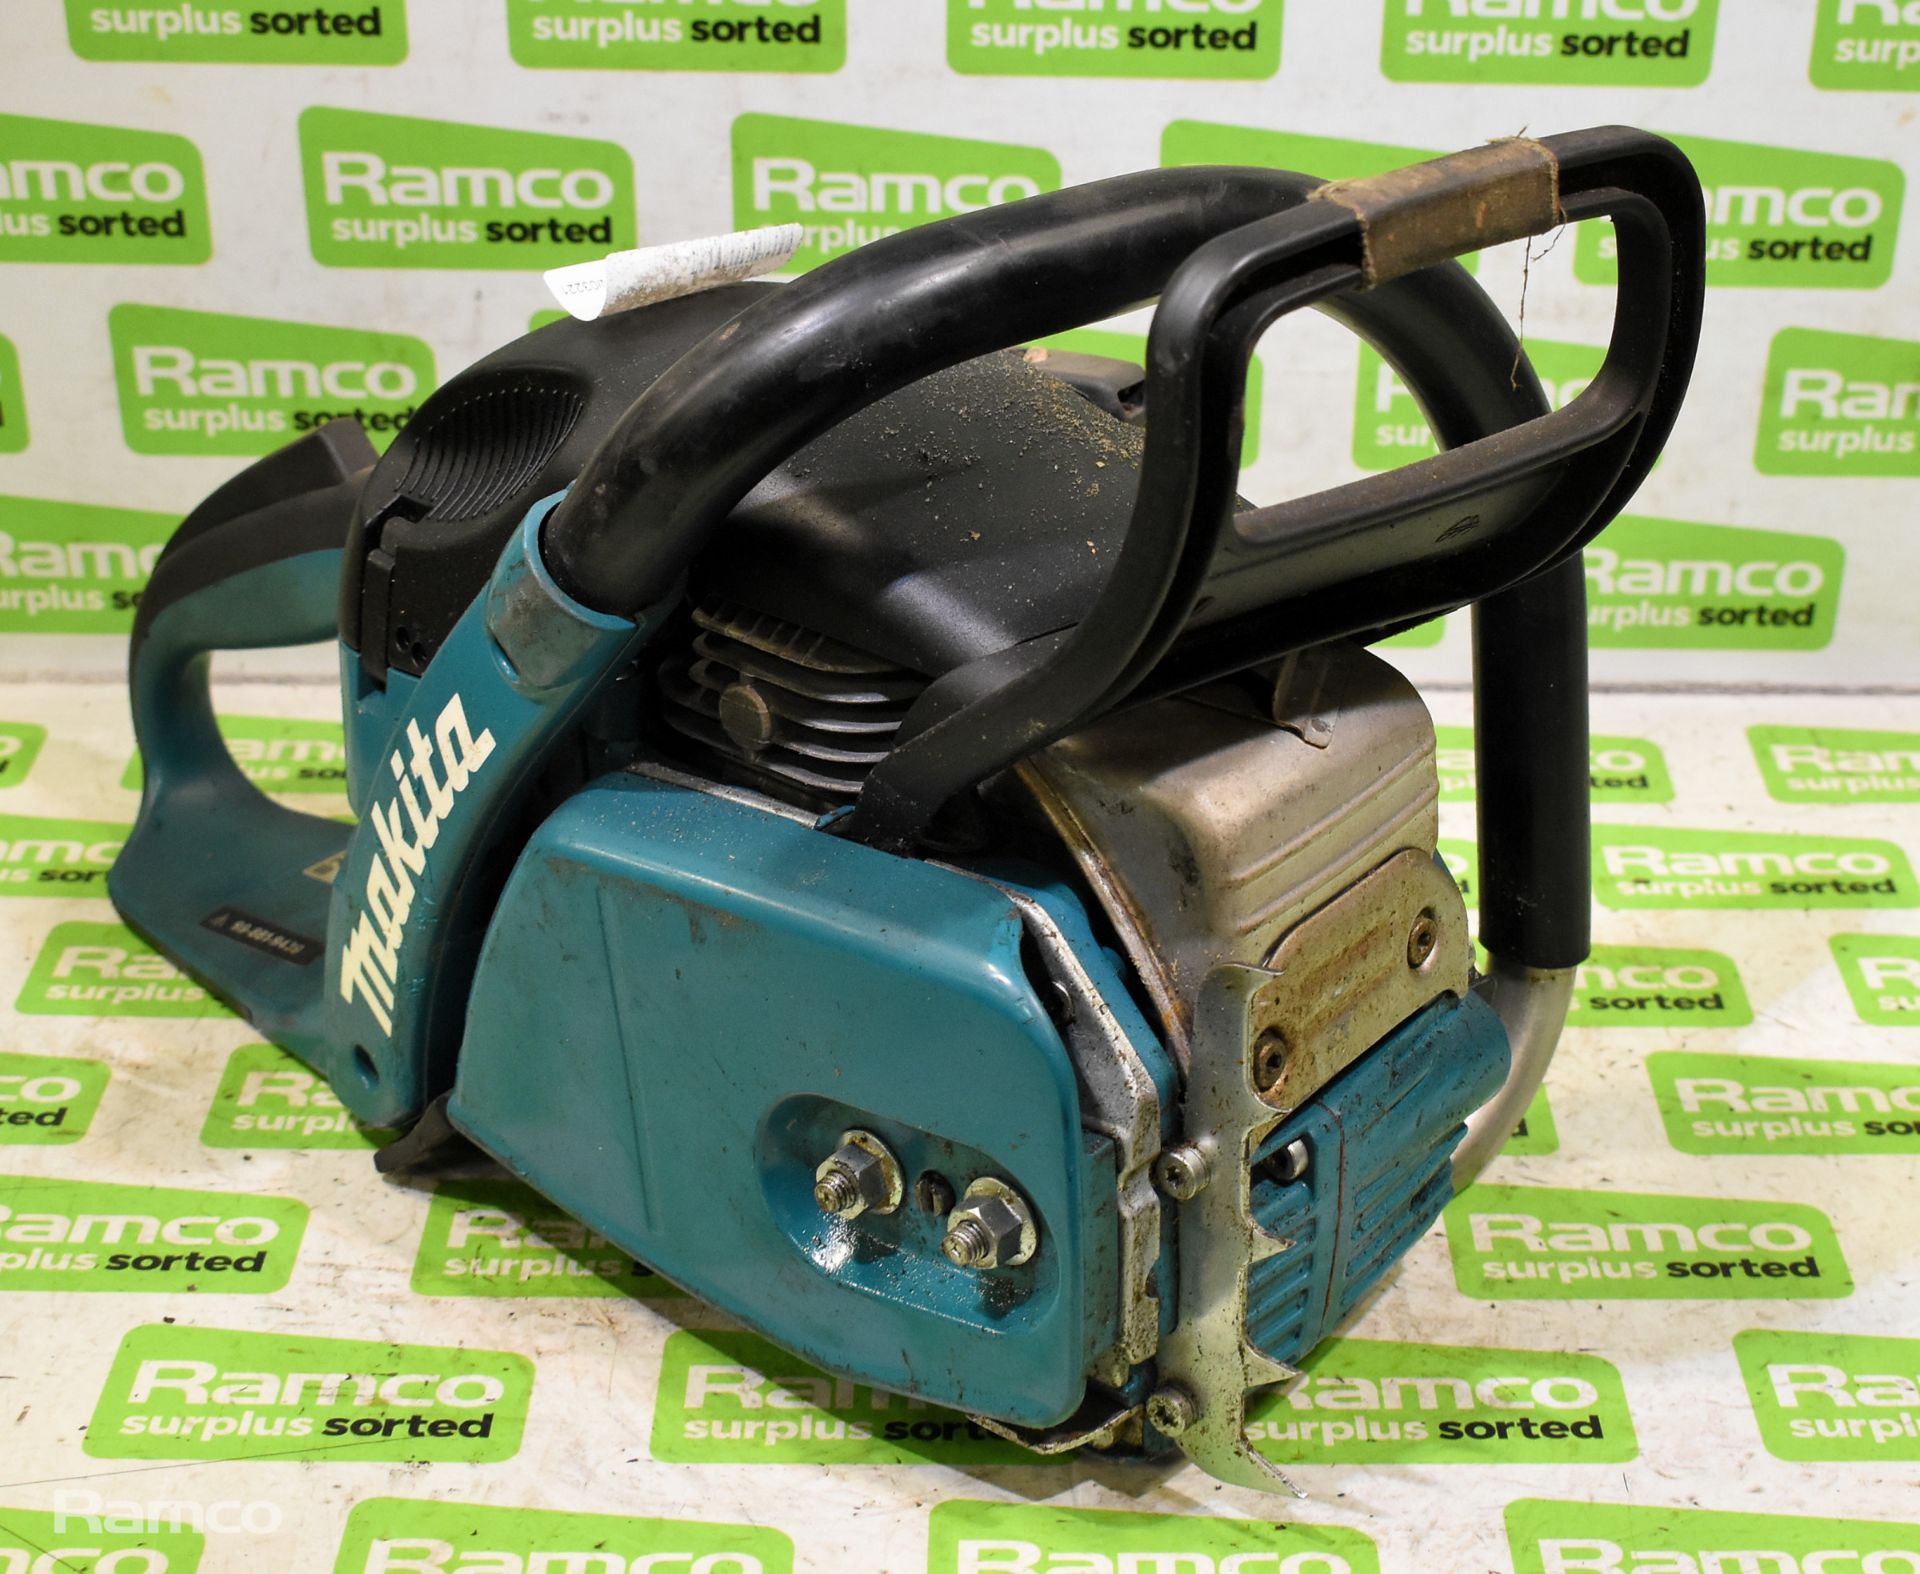 6x Makita DCS5030 50cc petrol chainsaw - BODIES ONLY - AS SPARES & REPAIRS - Image 10 of 33